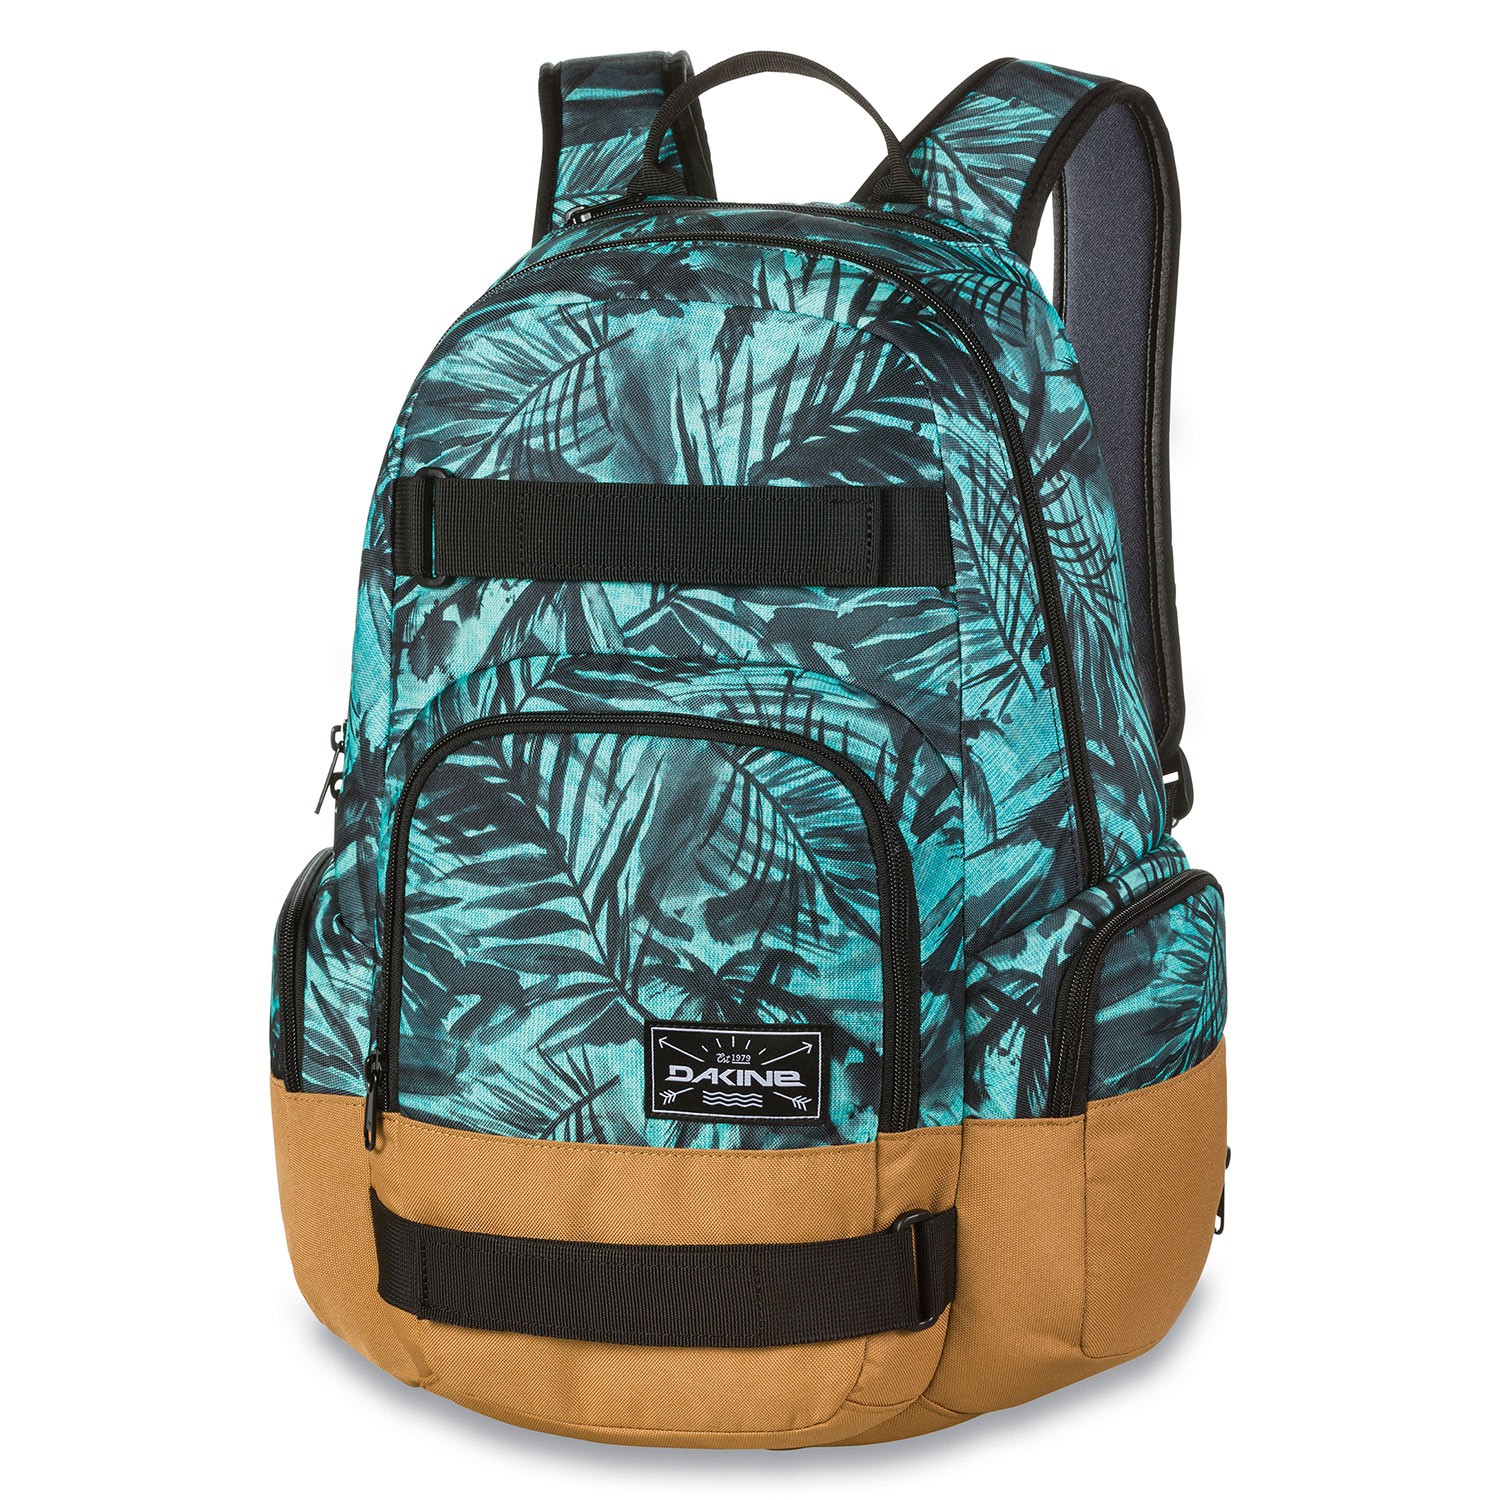 Details about  / Dakine Backpack Campus Pack Small 845.4oz School Backpack Laptop Backpack